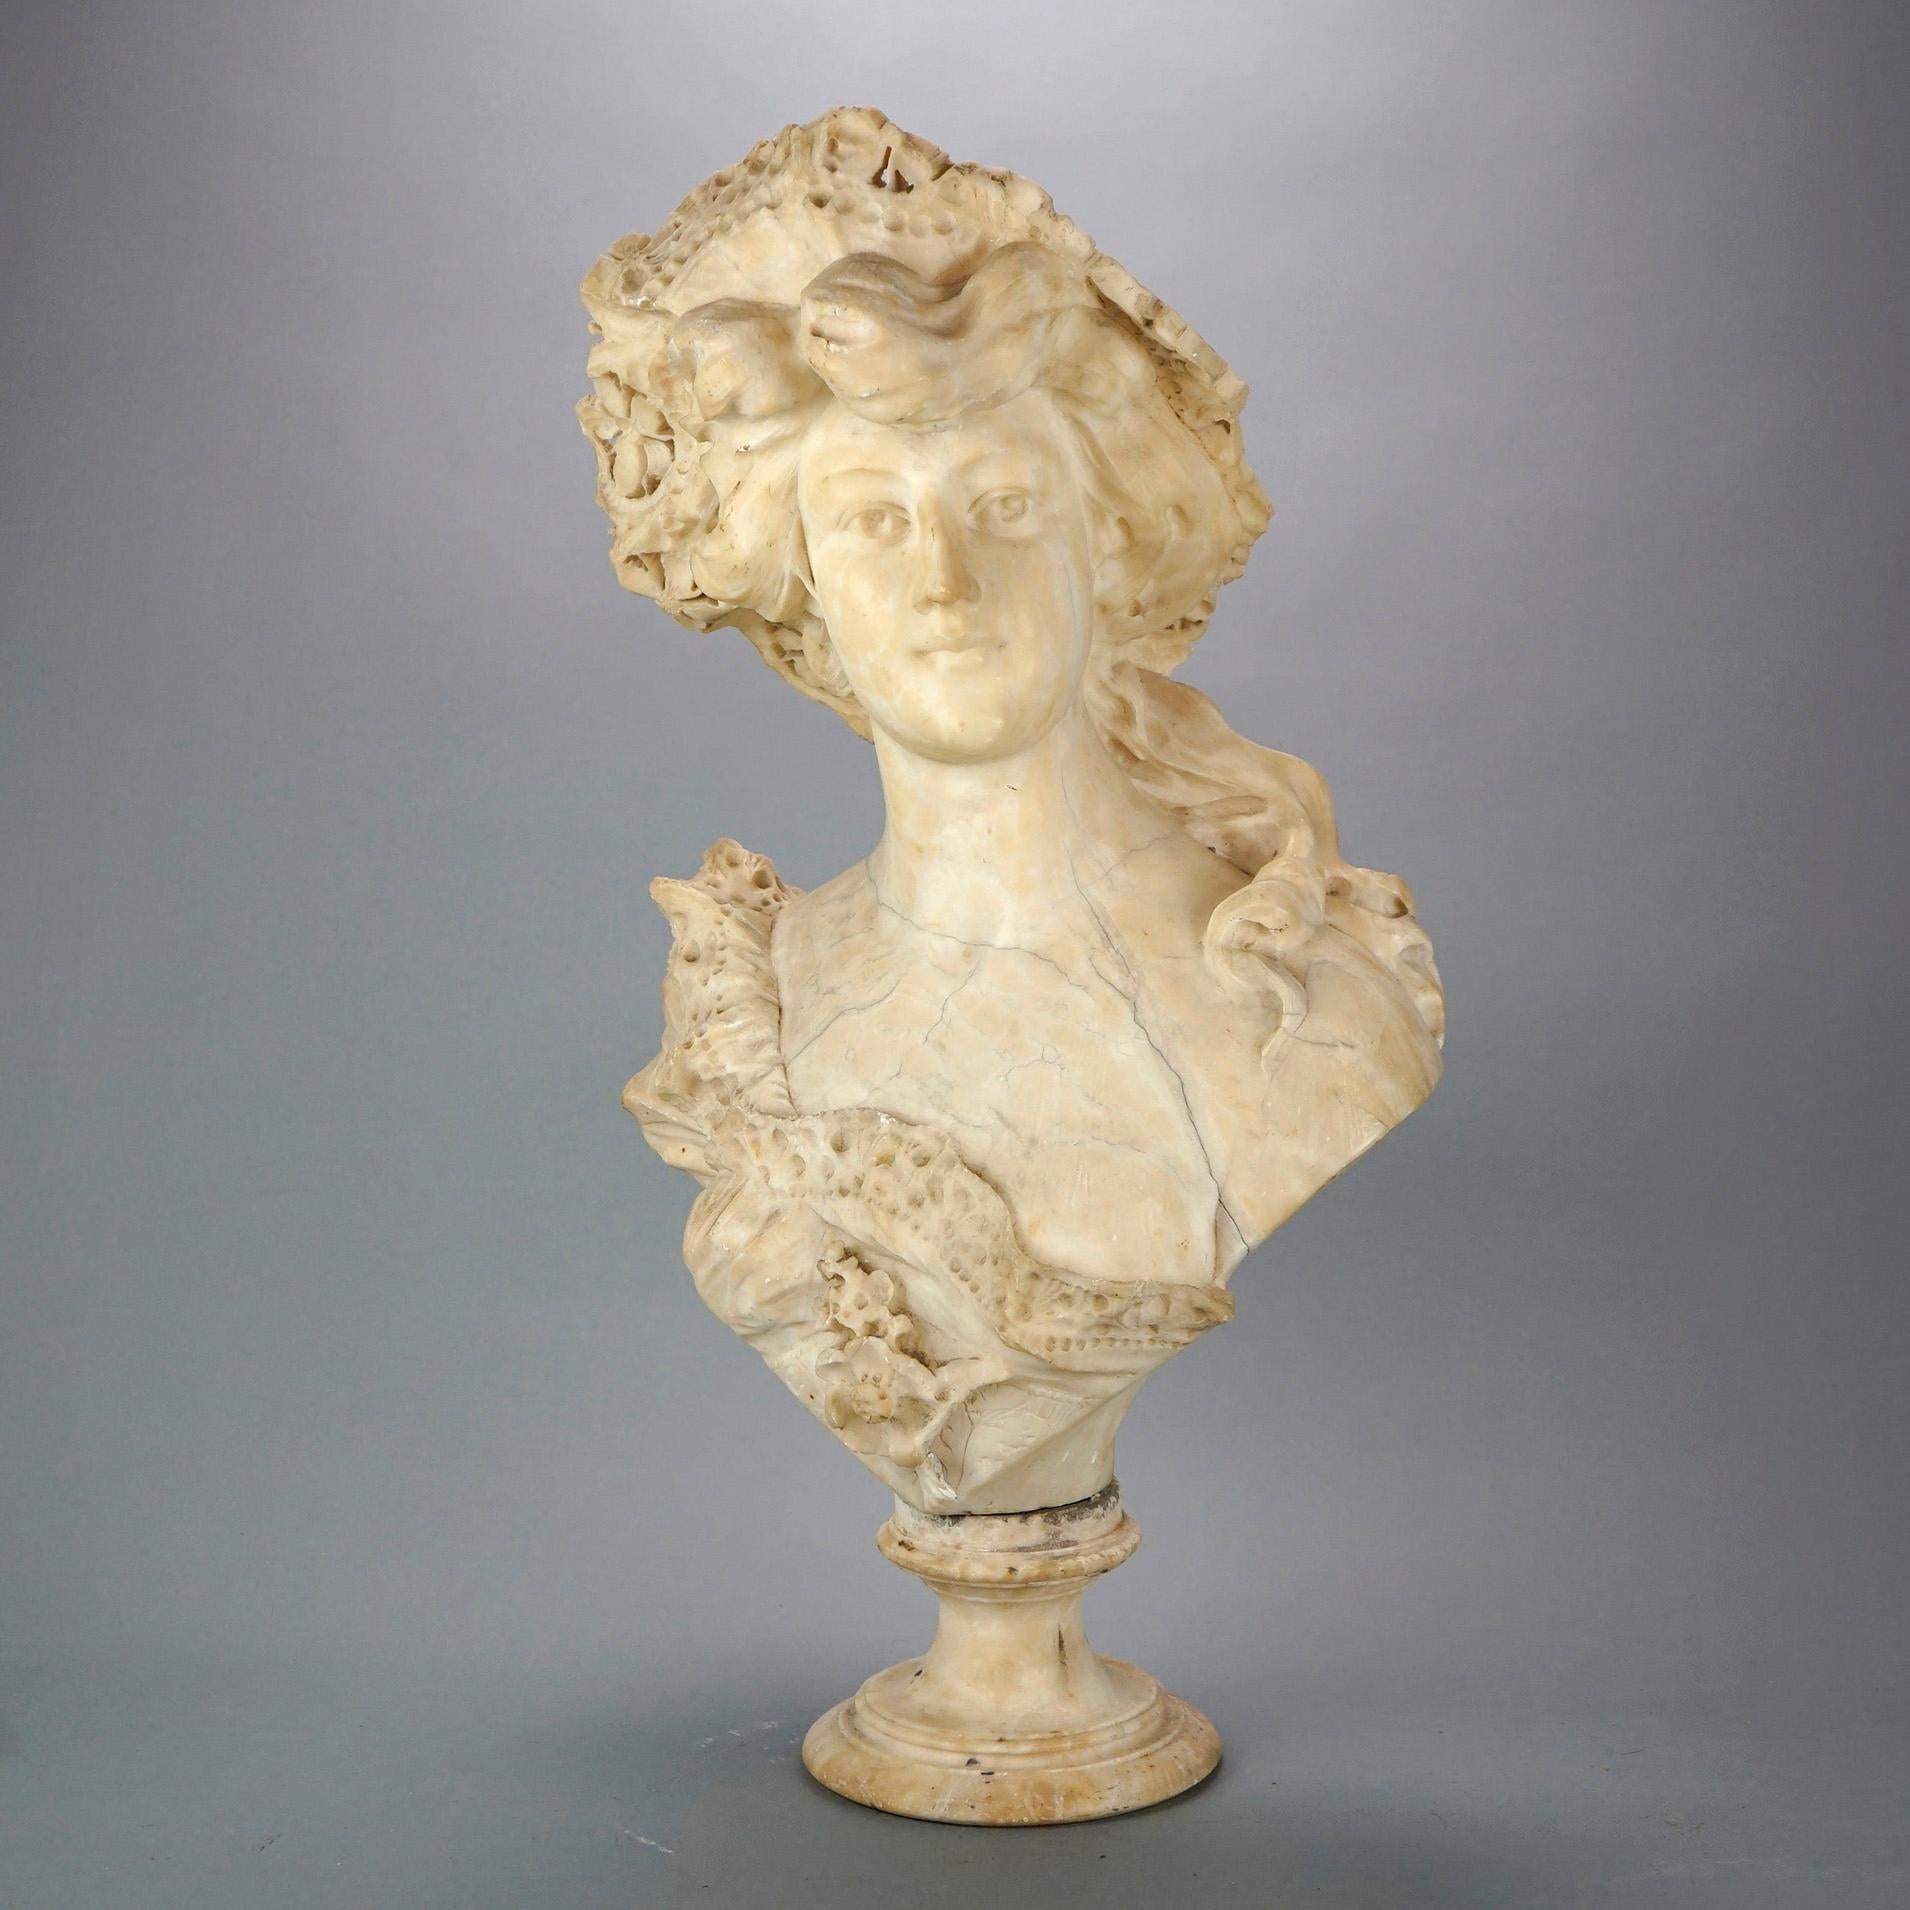 An Italian Victorian bust signed A. Cipriani offers carved marble portrait sculpture of a woman in a hat, signed as photographed, c1890

Measures- 28.5''H x 14''W x 10''D